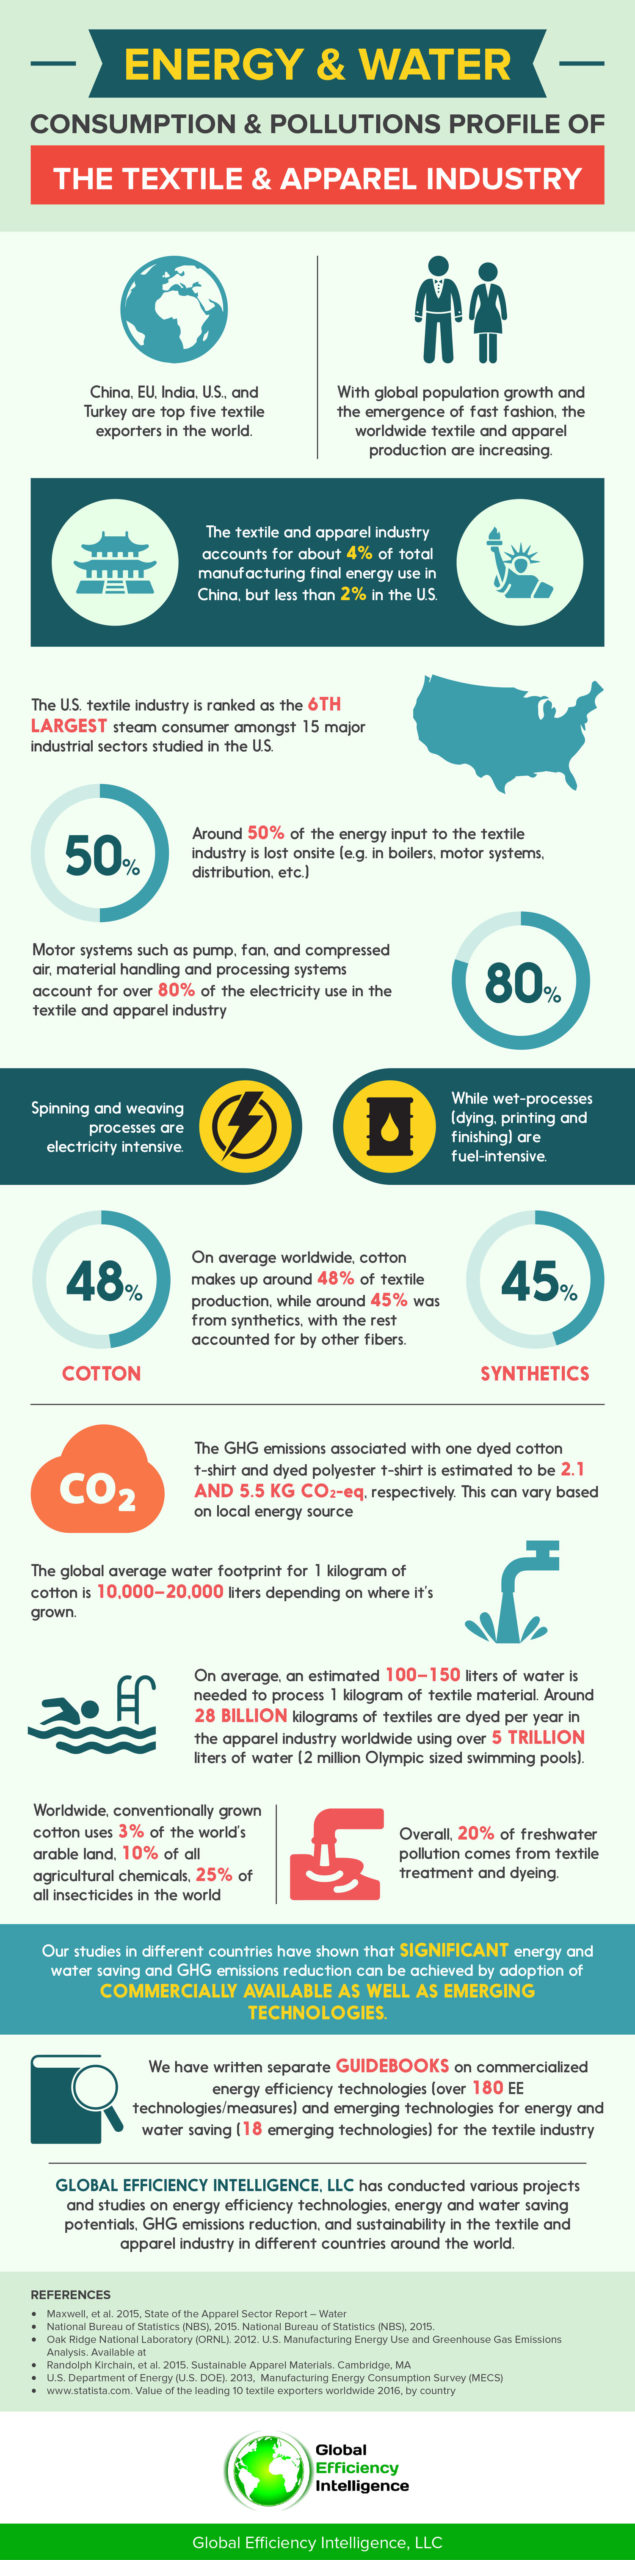 Infographic - Energy and Water Consumption and Pollutions Profile of the Textile and Clothing Industry